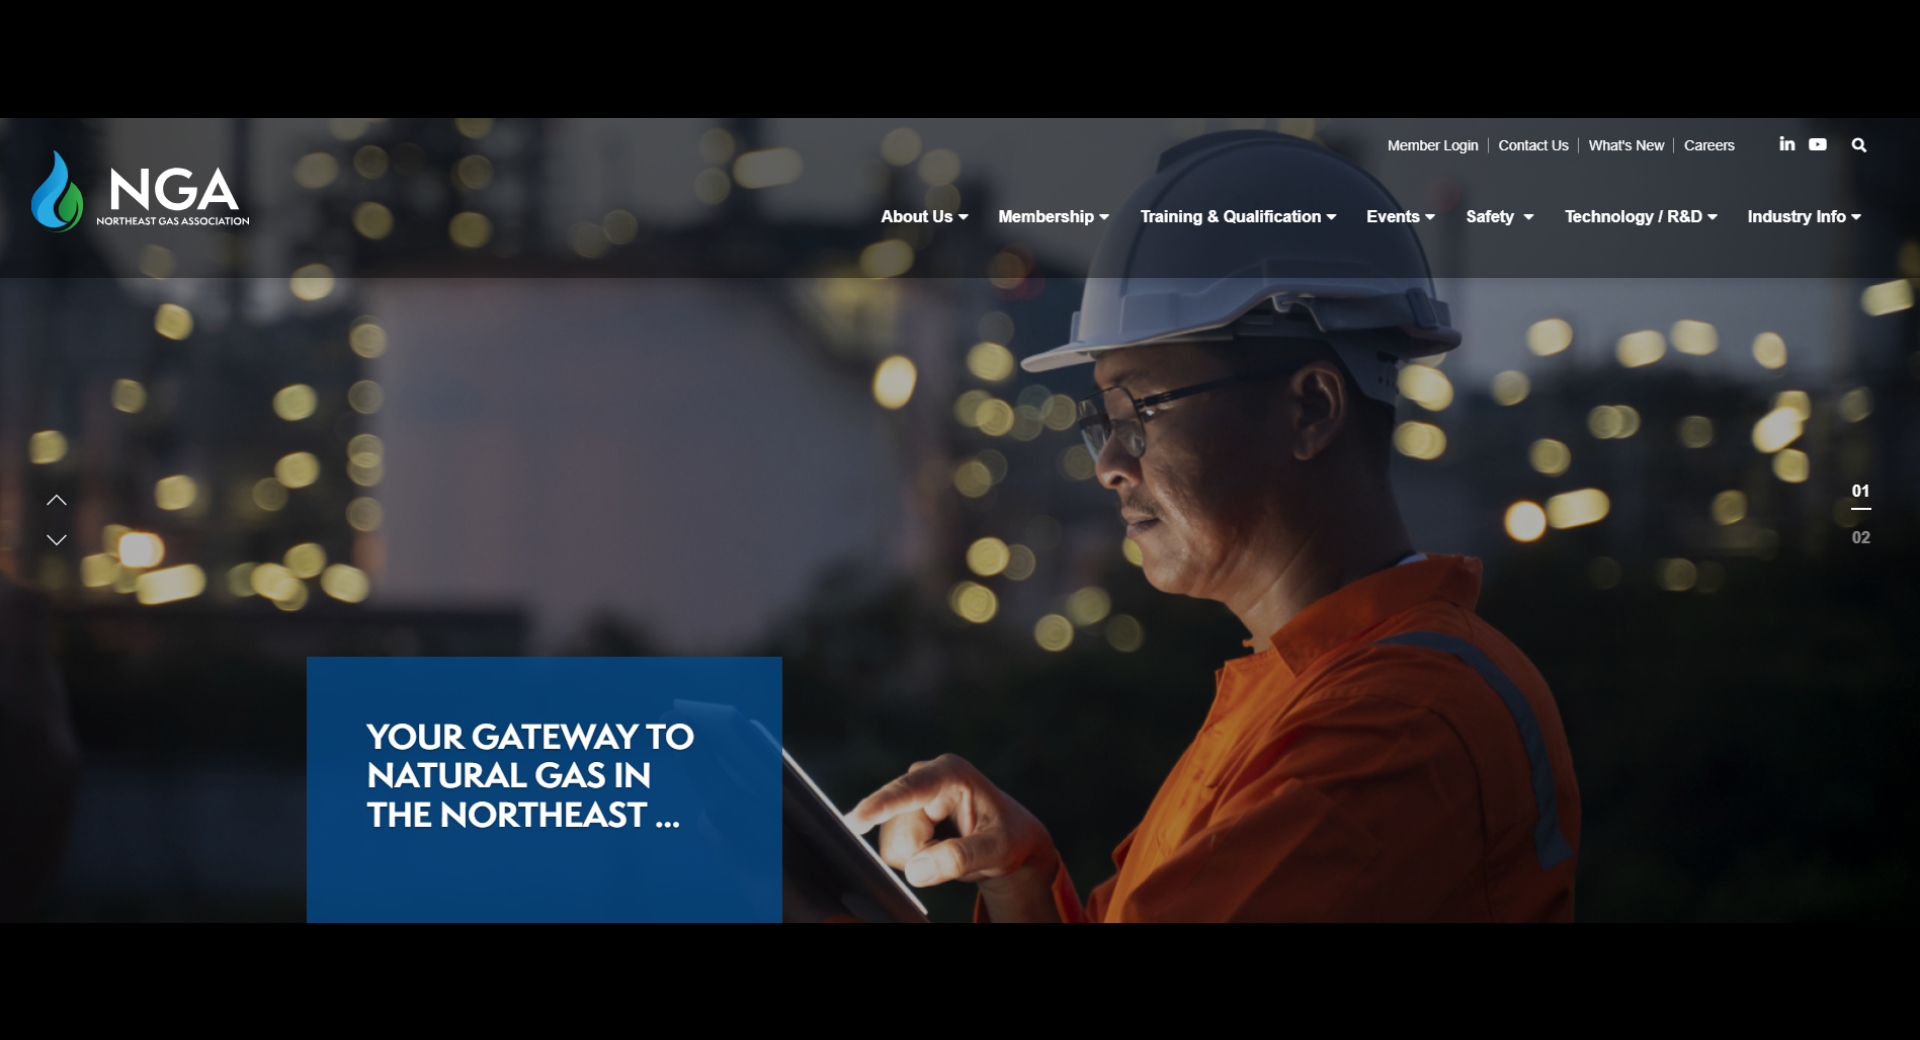 NGA Launches New Website